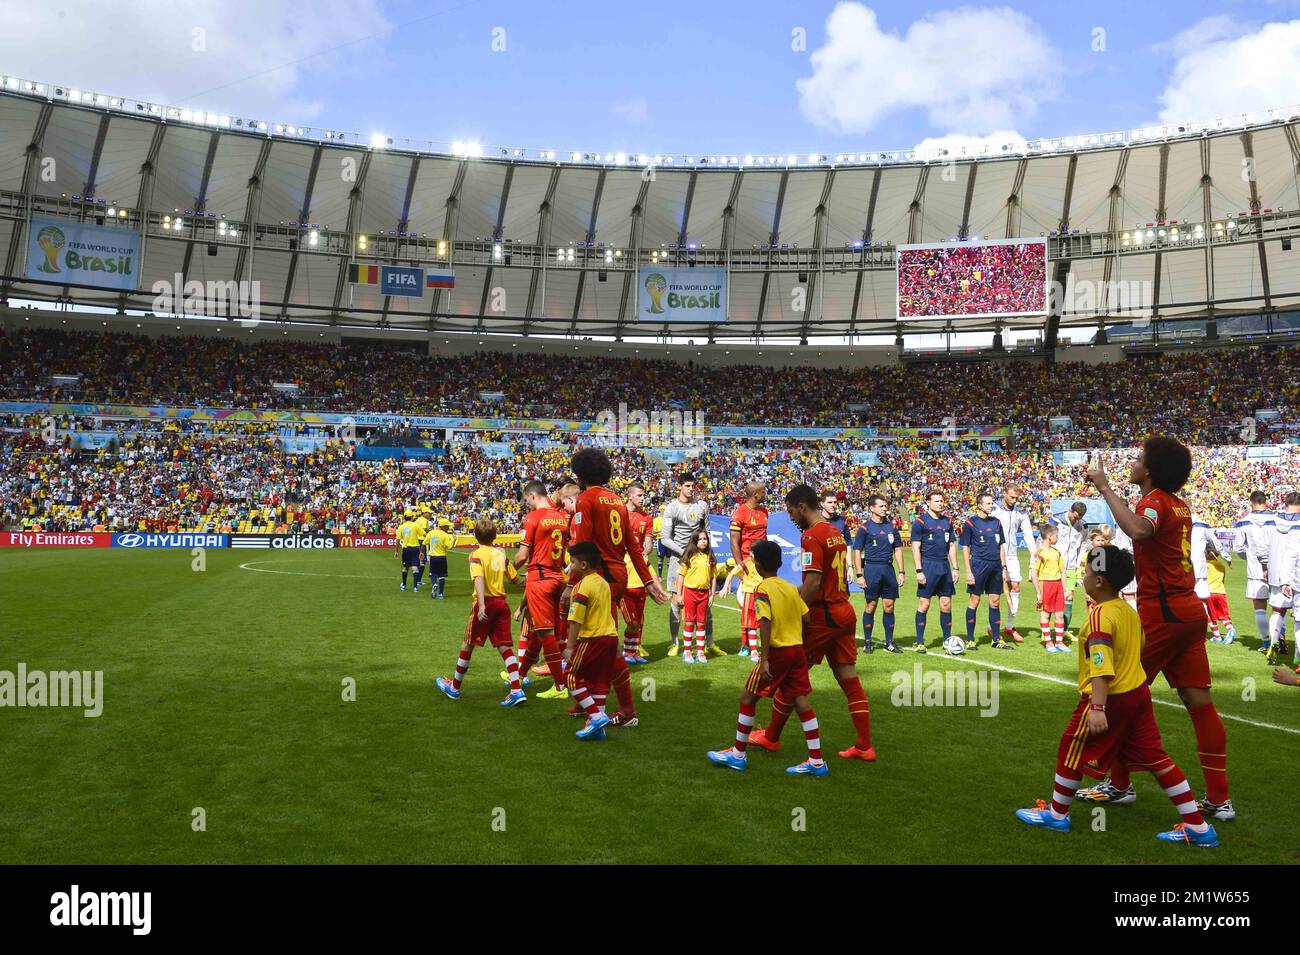 20140622 - RIO DE JANEIRO, BRAZIL: Belgian players pictured during a soccer game between Belgian national team The Red Devils and Russia in Rio de Janeiro, Brazil, the second game in Group H of the first round of the 2014 FIFA World Cup, Sunday 22 June 2014. BELGA PHOTO DIRK WAEM Stock Photo